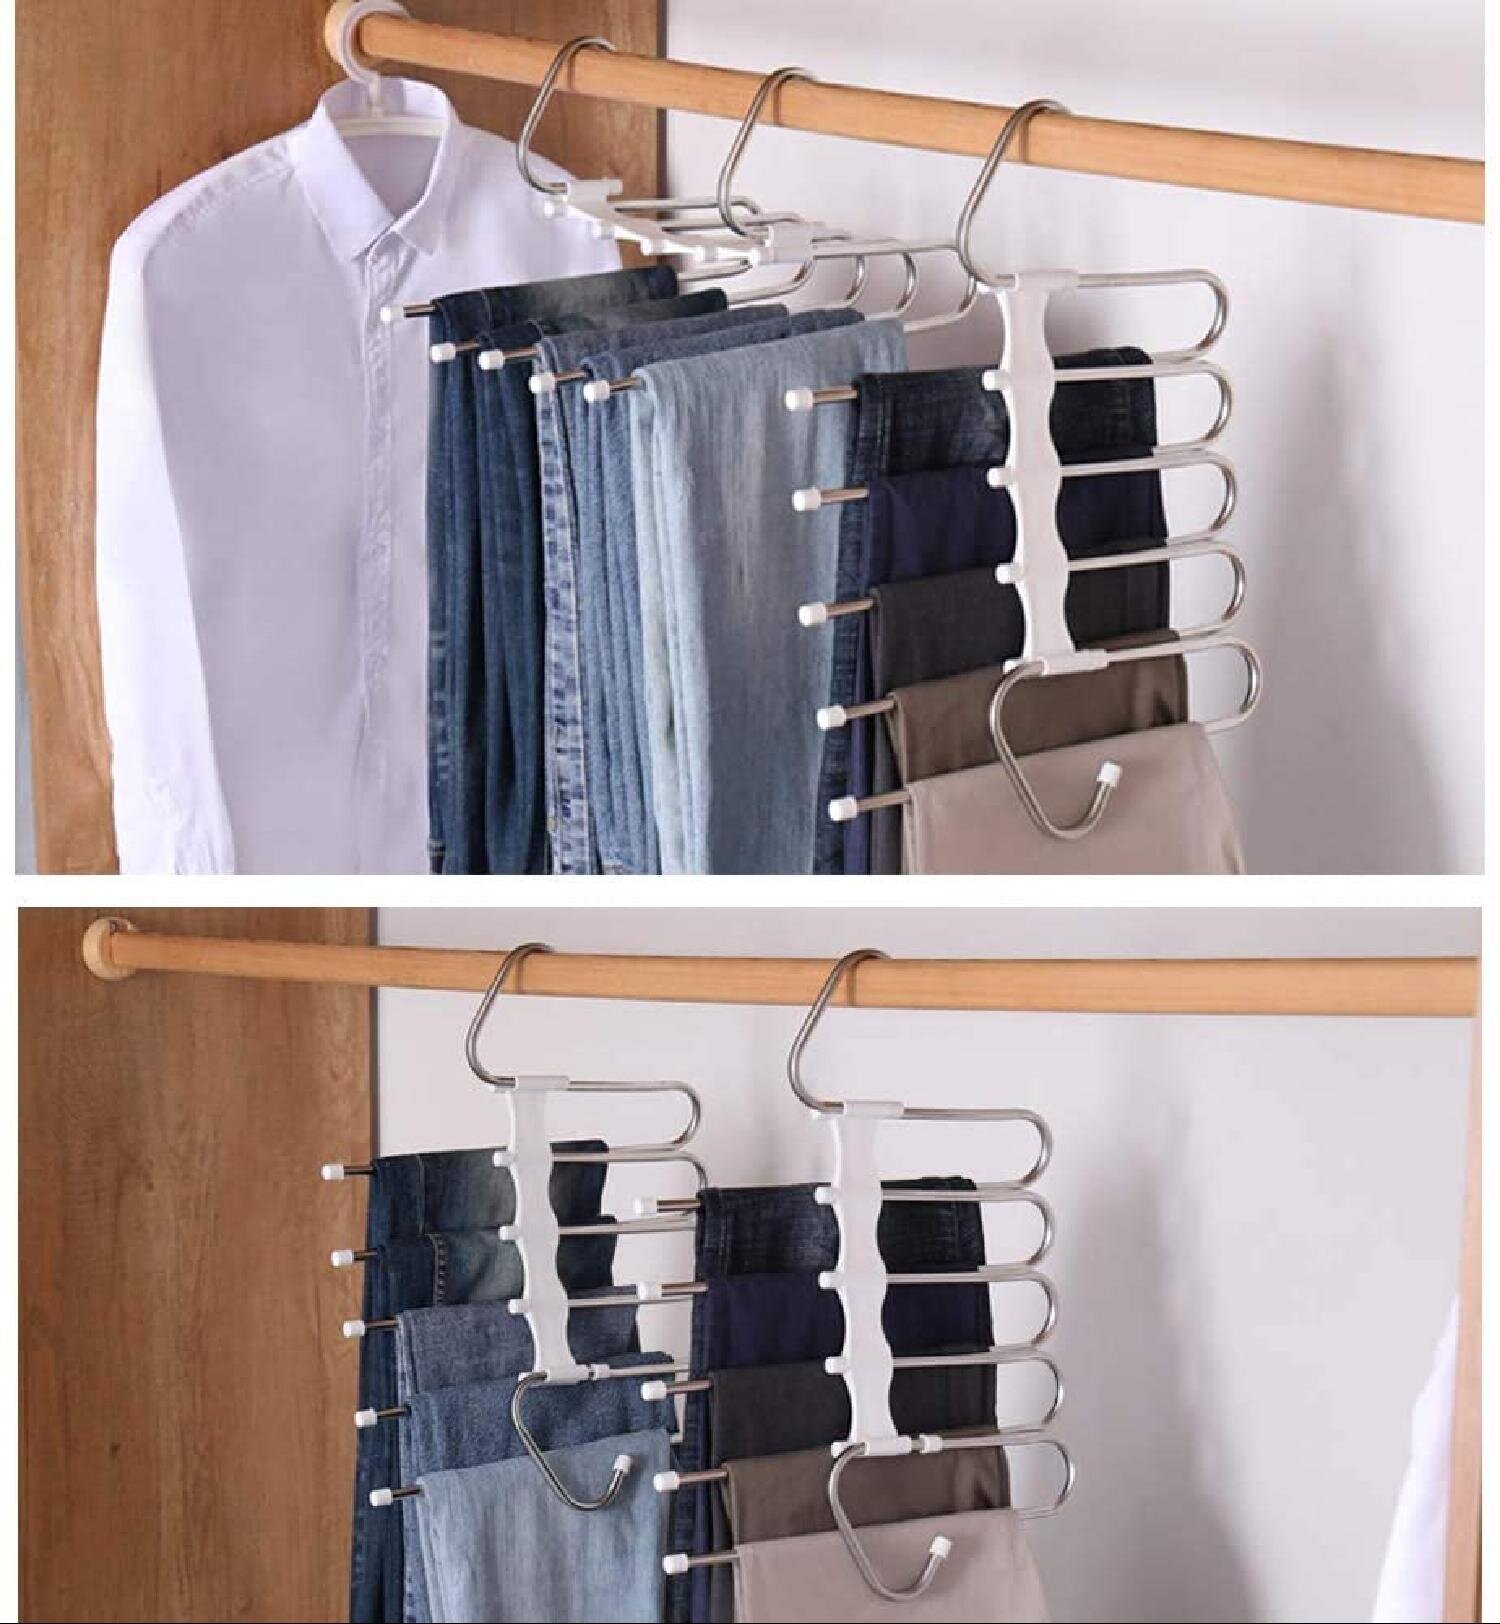 OMAAI Pants Hangers Premium S-Shape Stainless Steel Jeans Hanger with 5 Layers for Multi-Use Space Saver for Trousers Towels Scarfs Ties Type-A7 